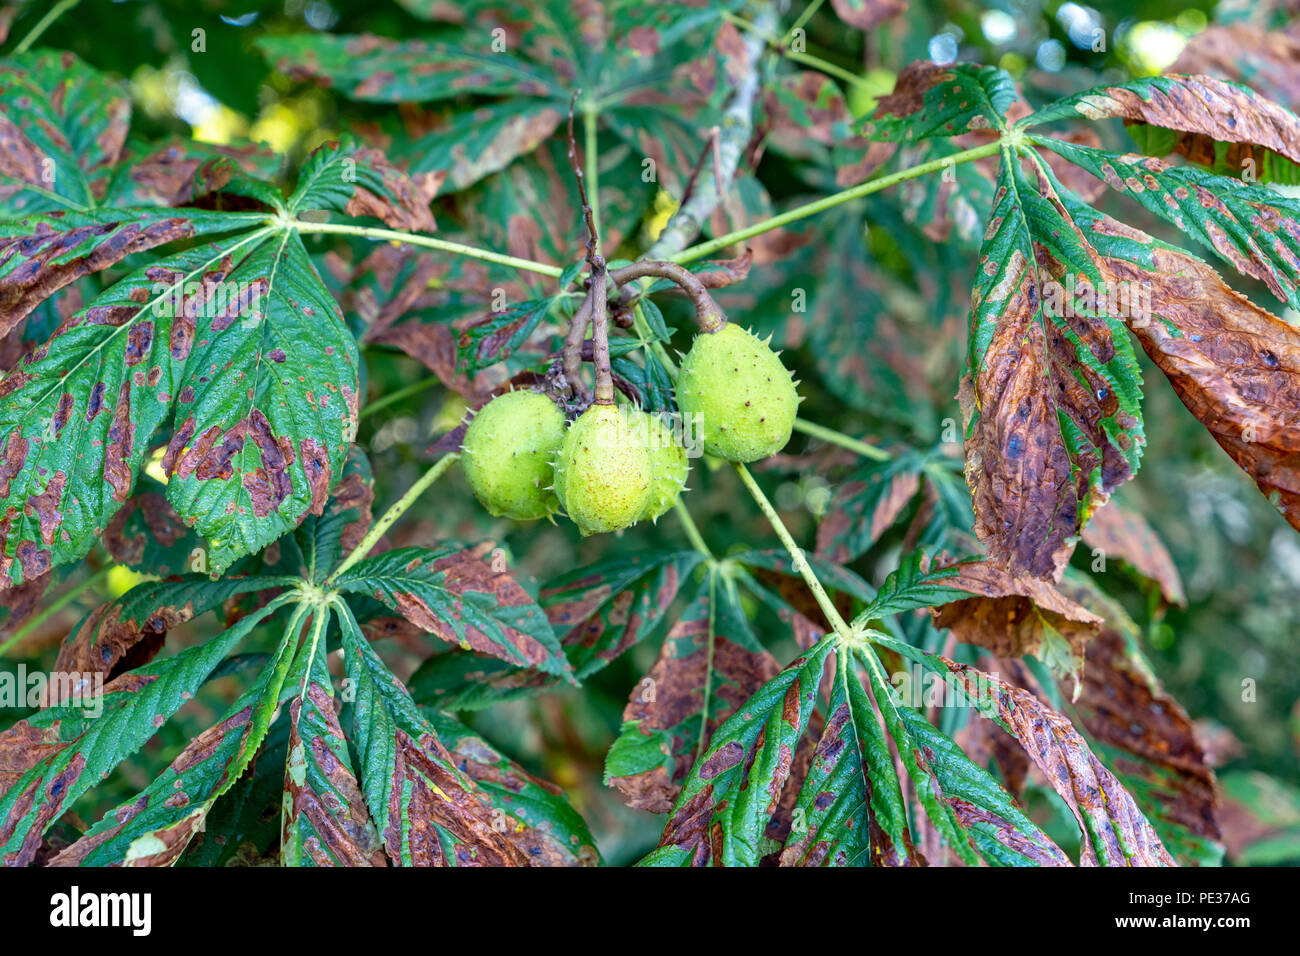 Guignardia aesculi leaf blotch in Horse Chestnut tree with conkers Stock Photo